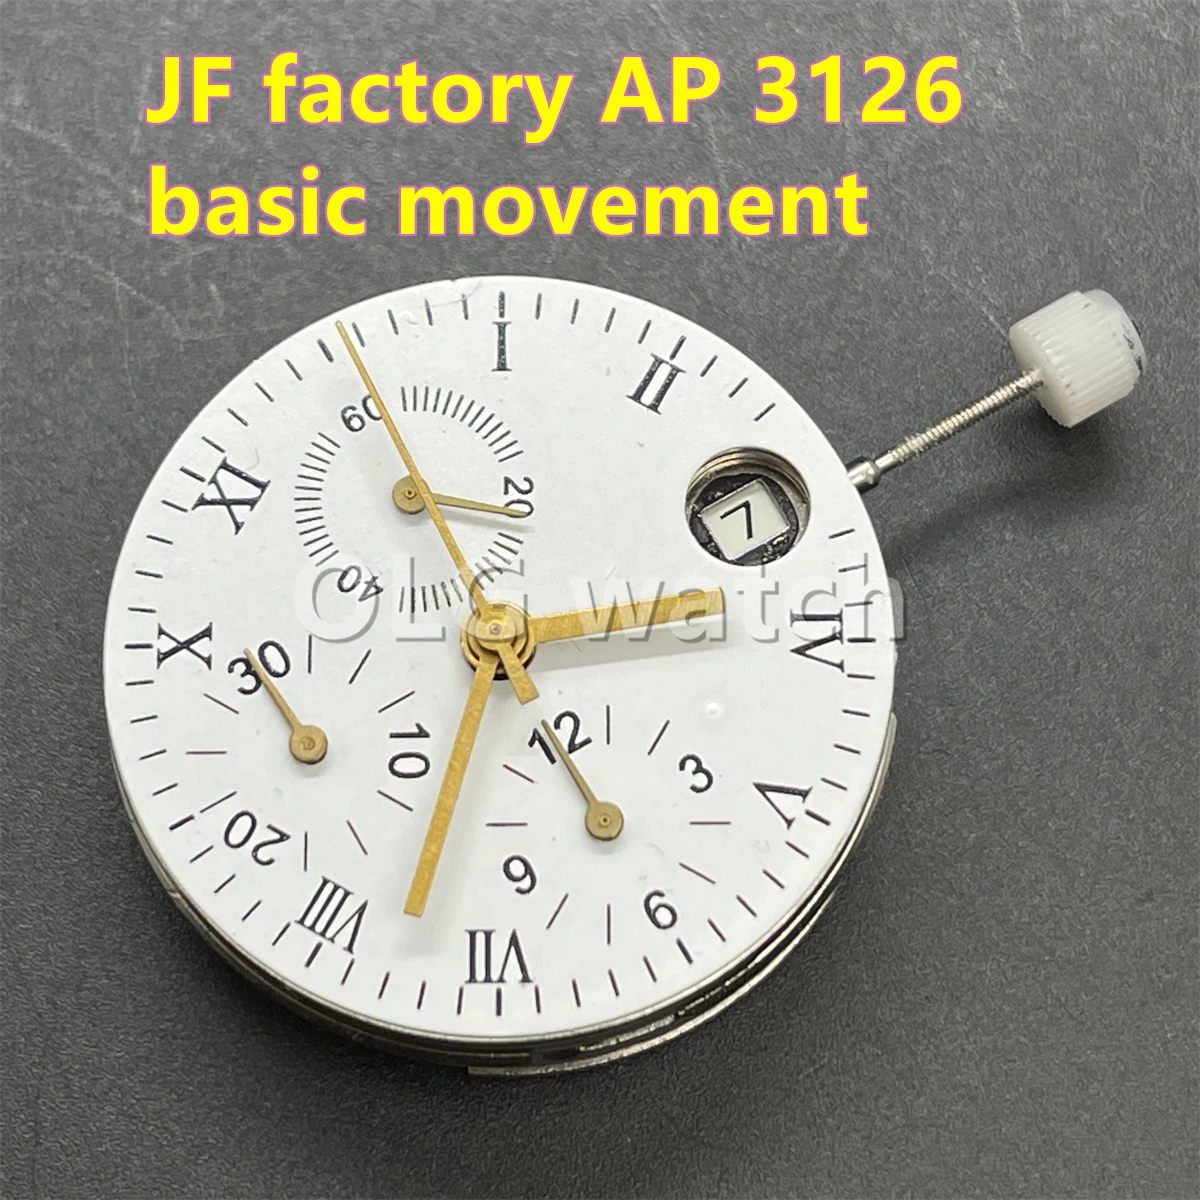 

J Factory AP 3126 basic movement Chronograph seconds at 12 o'clock Automatic Movement 7750 Replacement Date Watch parts 6.9.12